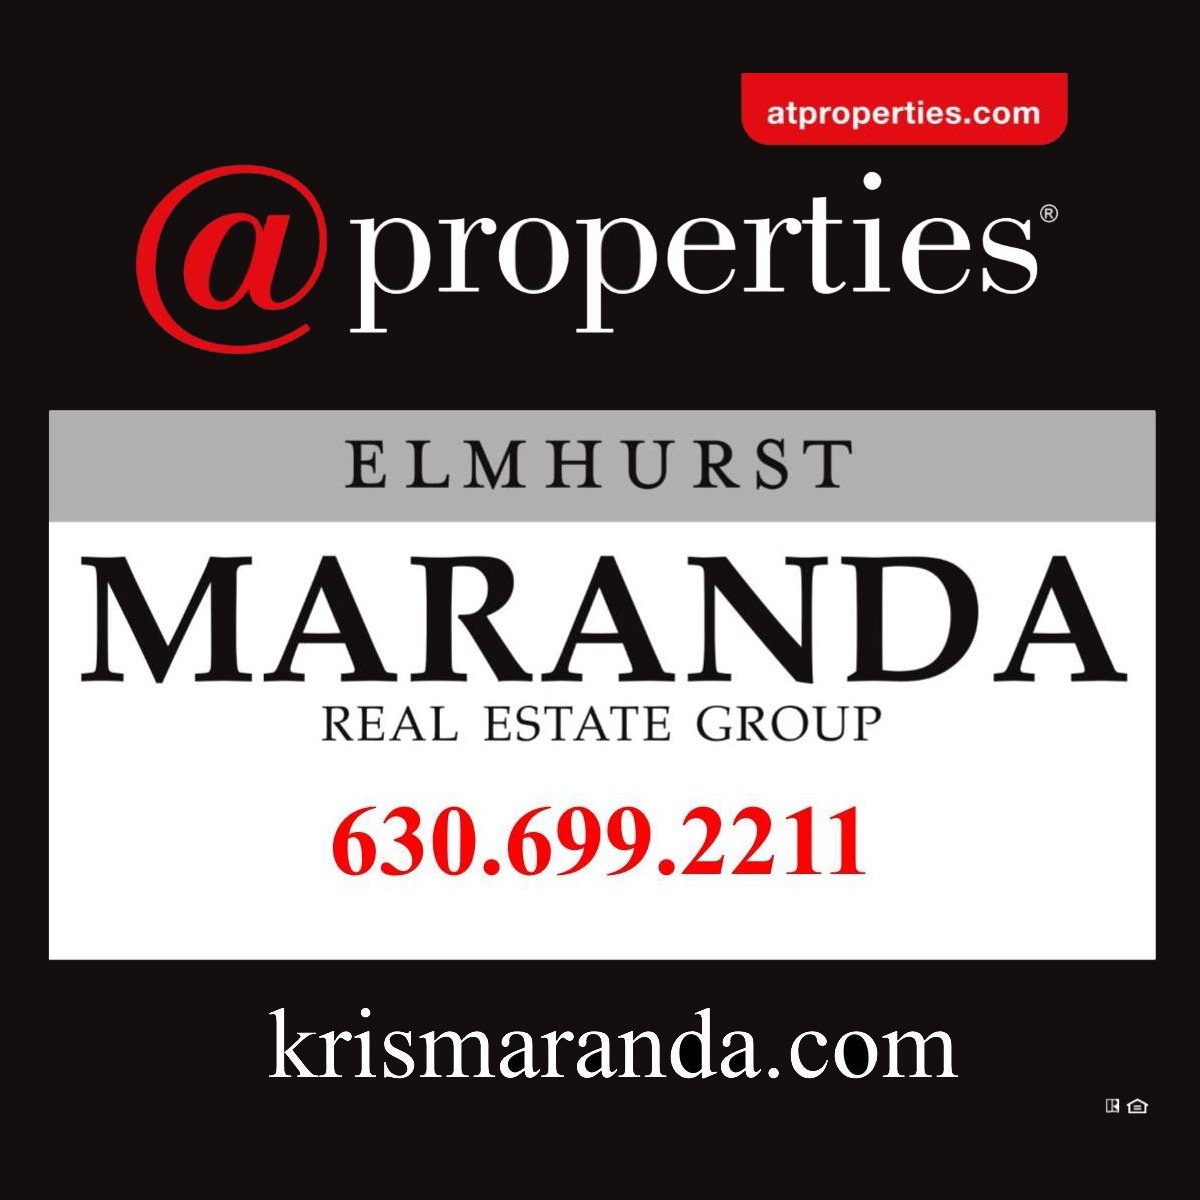 Call our experienced team at Maranda Real Estate Group for the one on one dedicated service you need to help you accomplish your real estate goals.